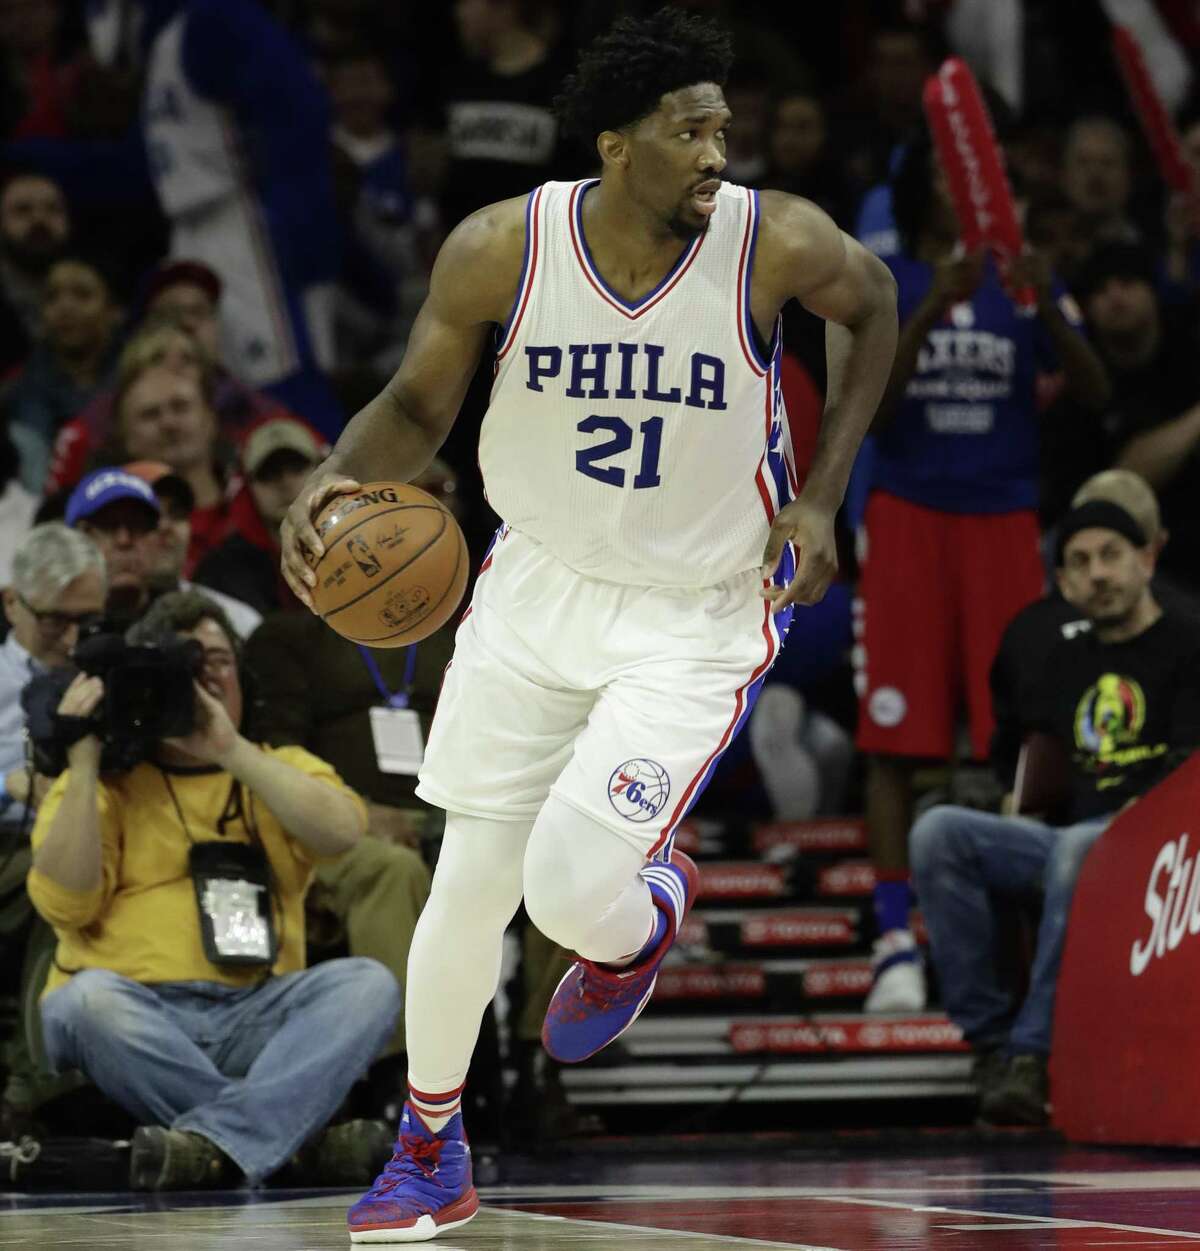 Philadelphia’s Joel Embiid is a top rookie of the year candidate despite limited playing time this past season.